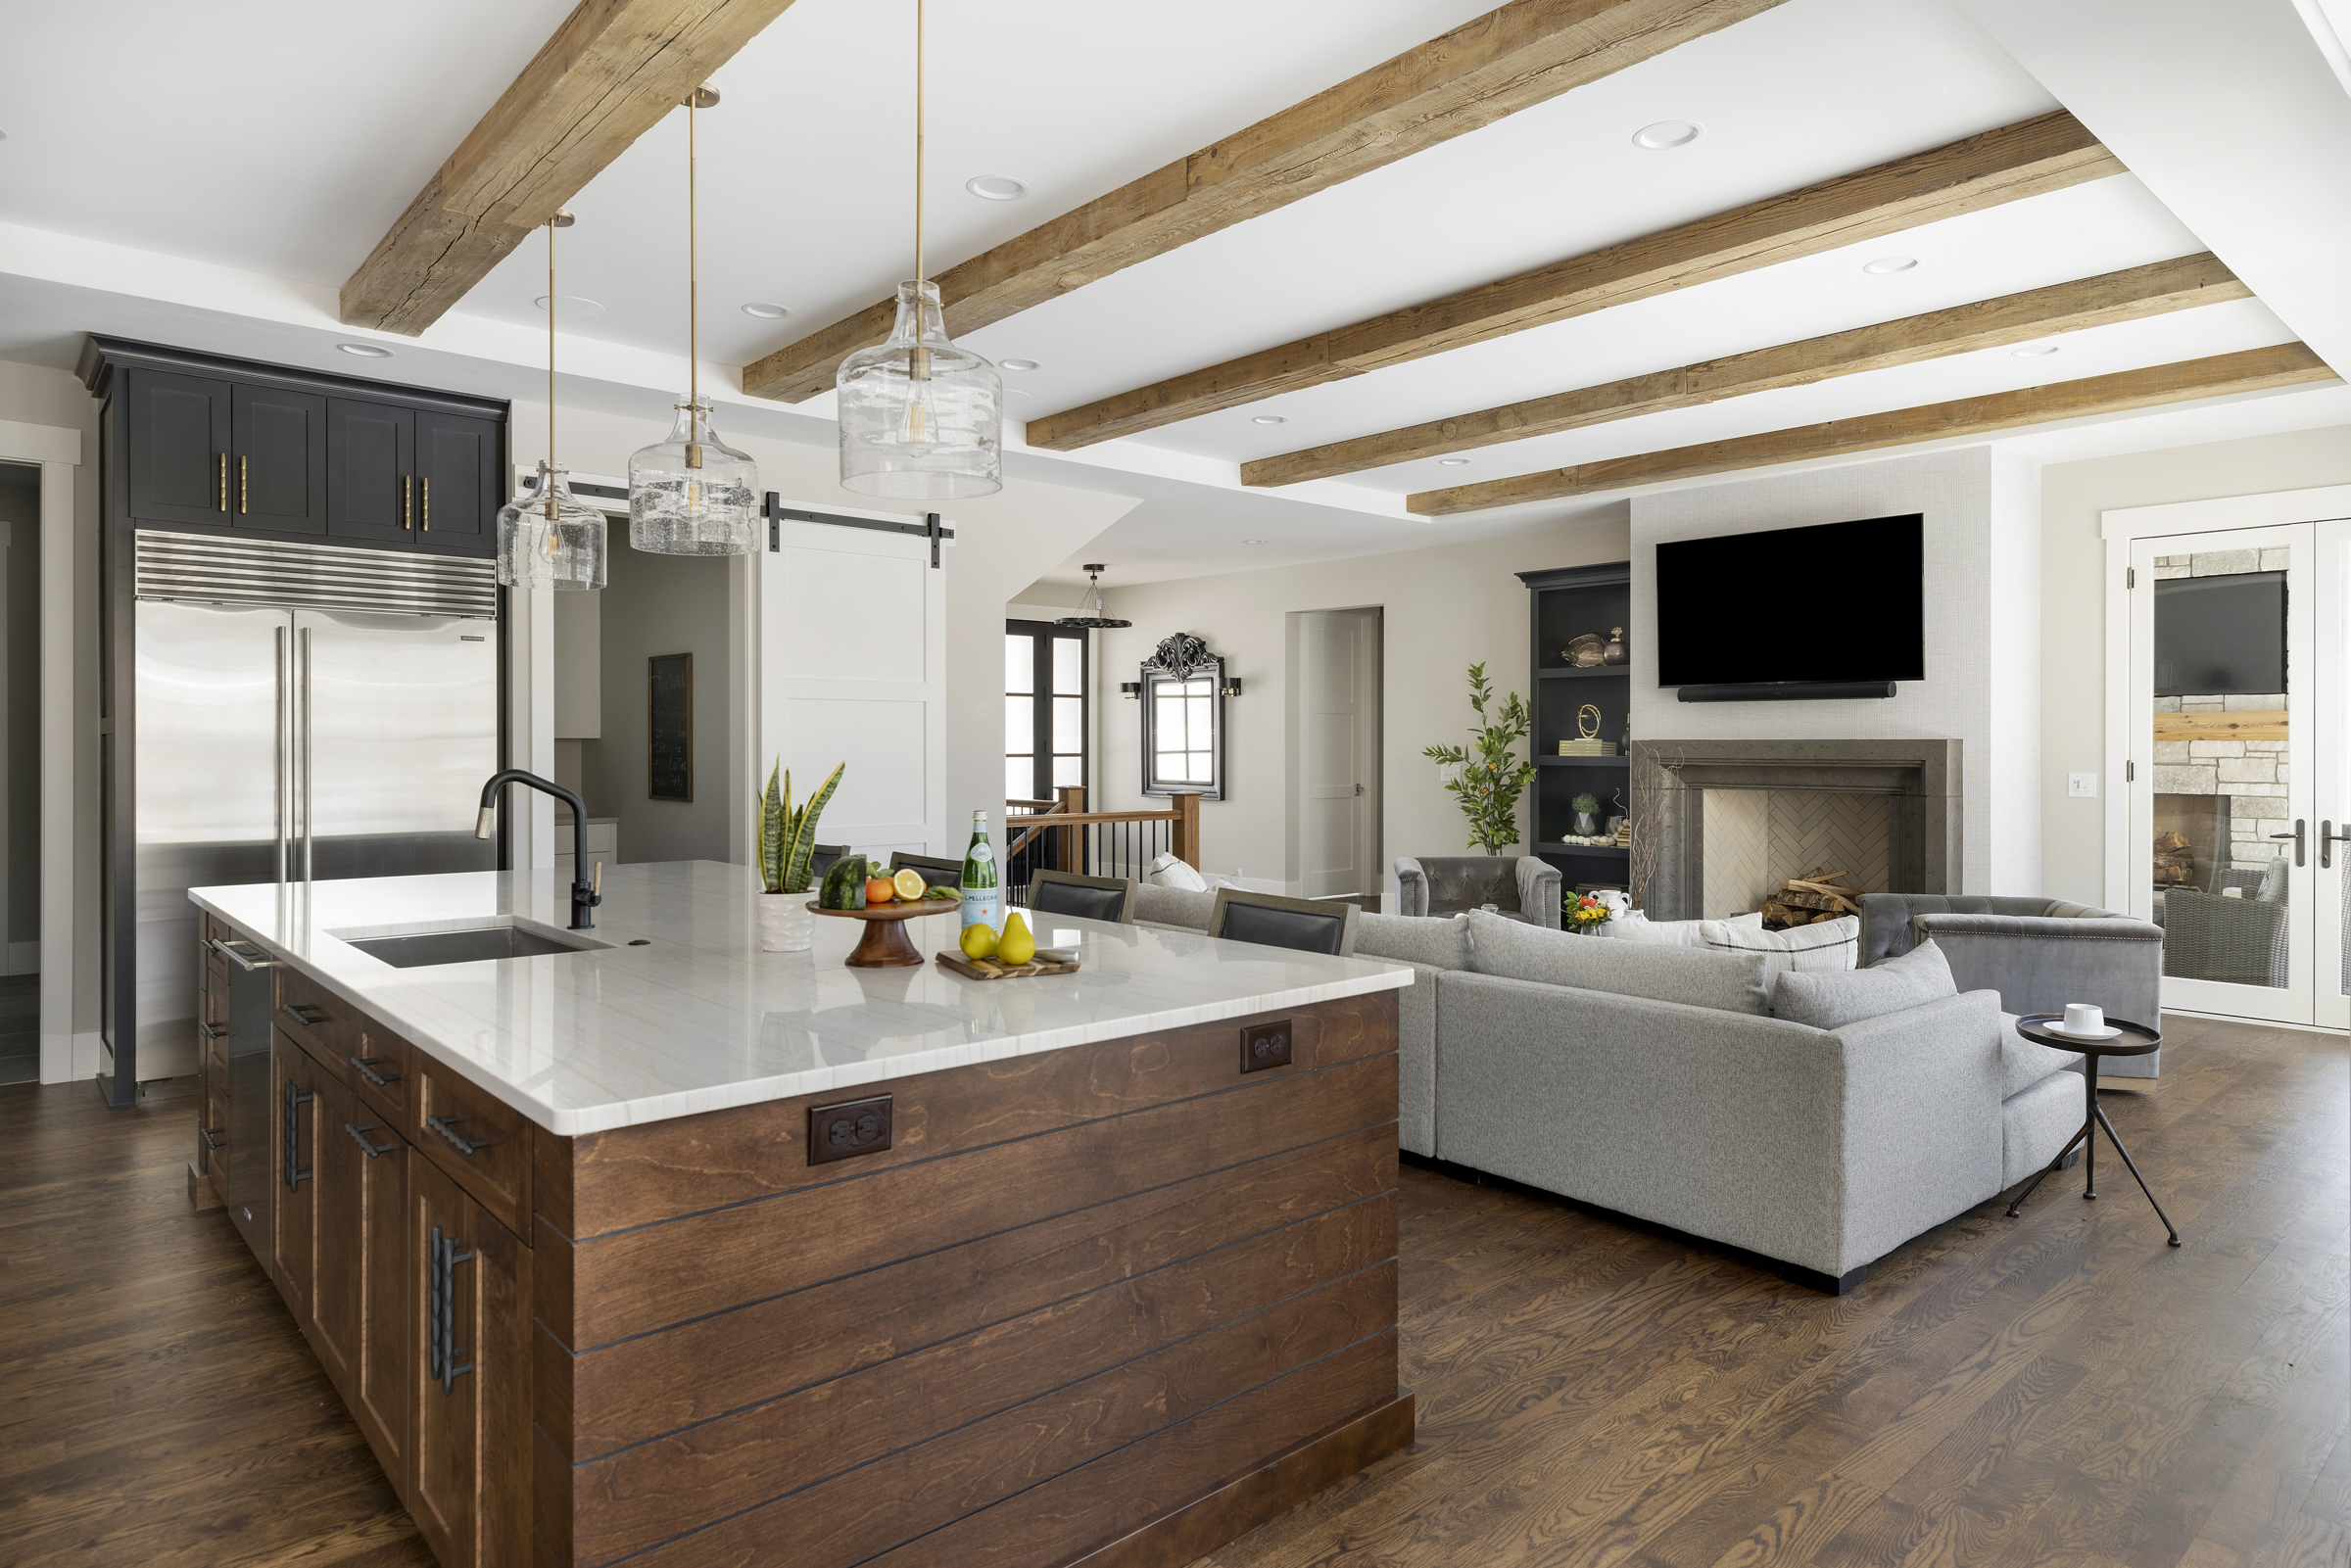 oversized kitchen island with white countertops, wooden ceiling beams, and they grey living room couch in the background